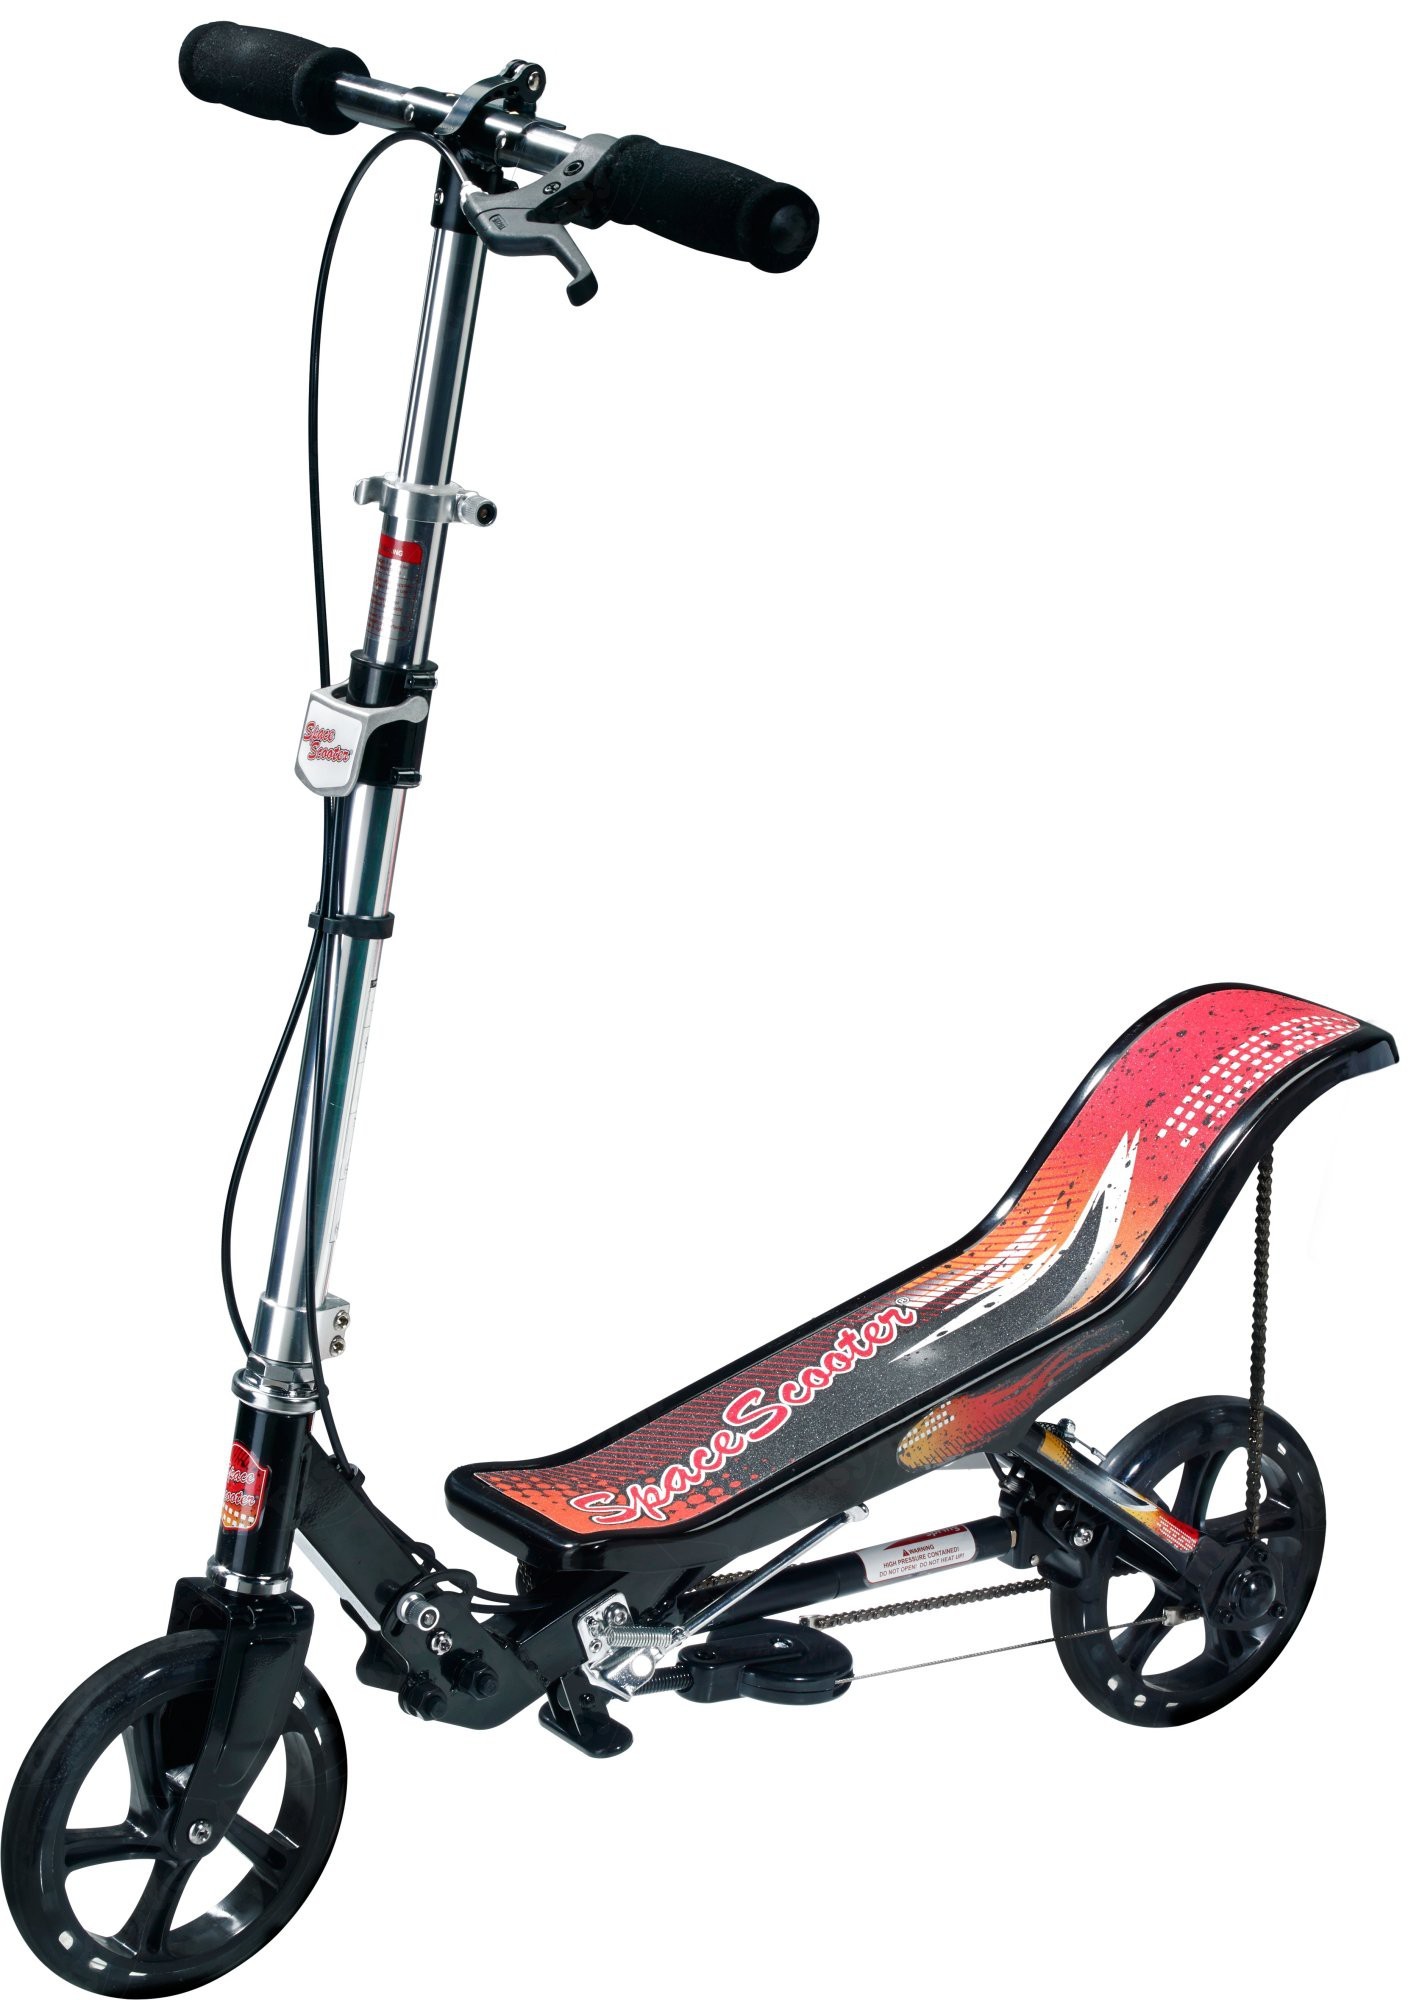 Black Space Scooter X580 Push Board Seesaw Kids Scooter with Brake Air Suspension & Compact Fold 